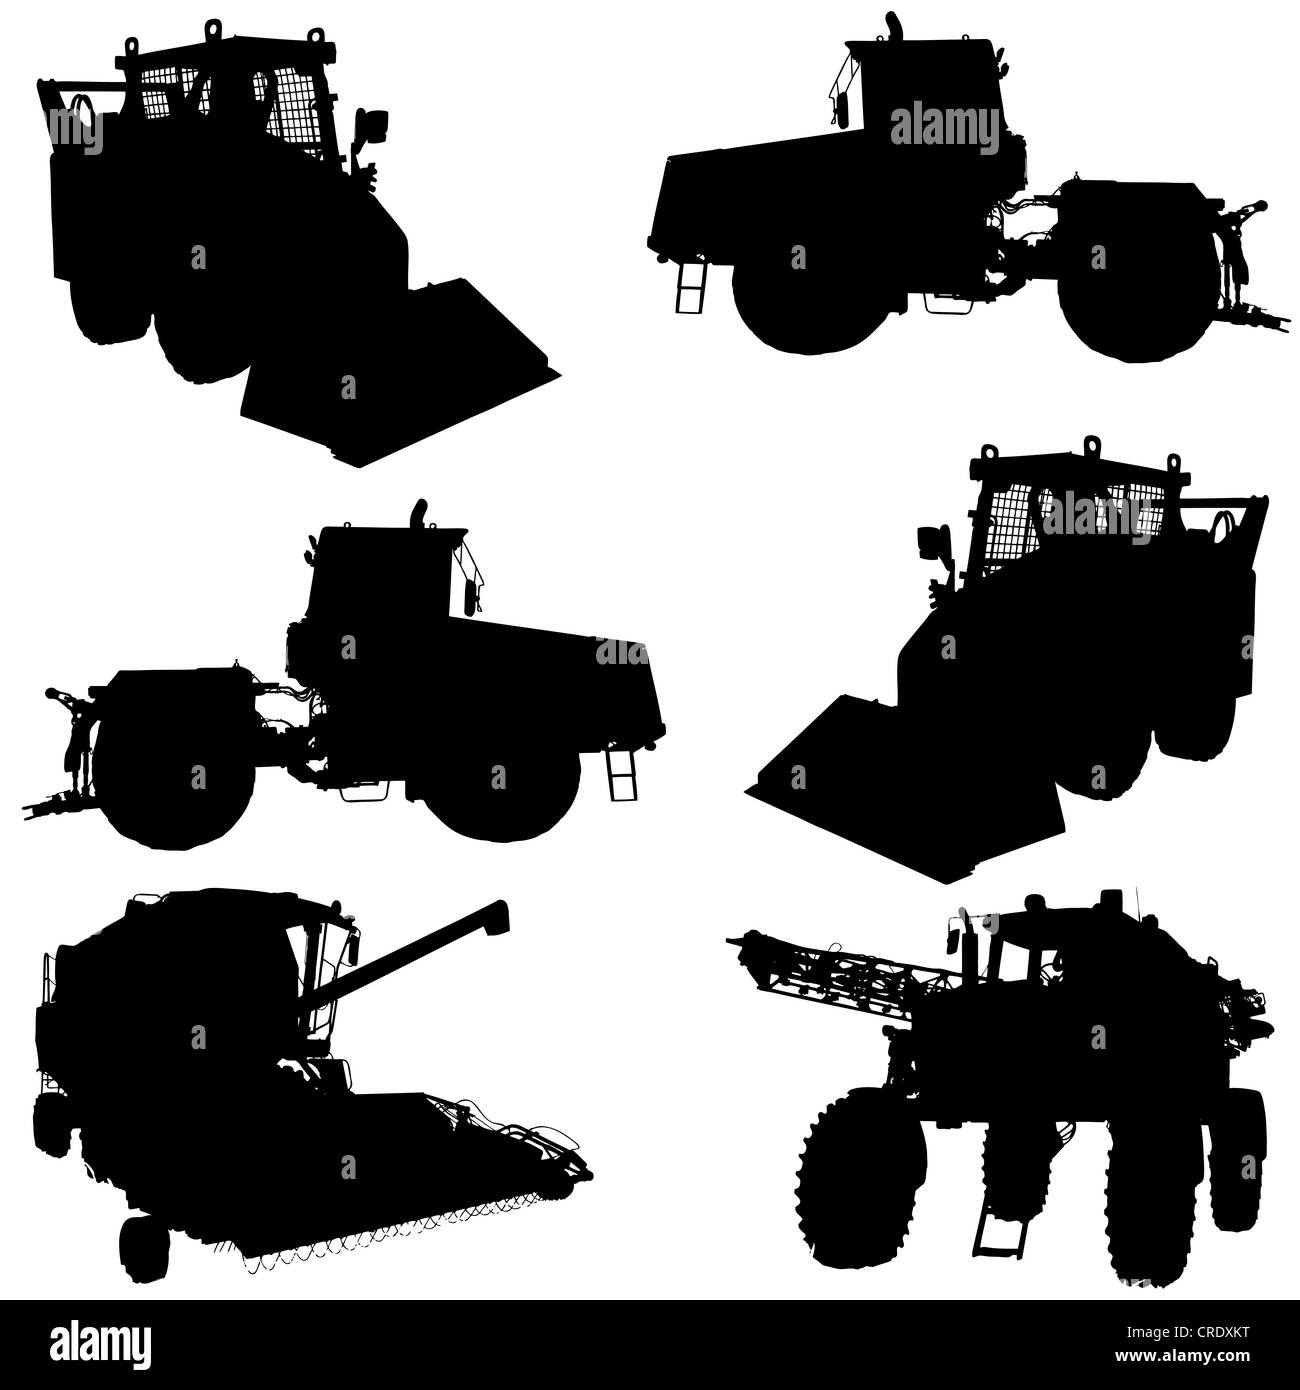 Agricultural vehicles silhouettes set. Vector illustration. Stock Photo